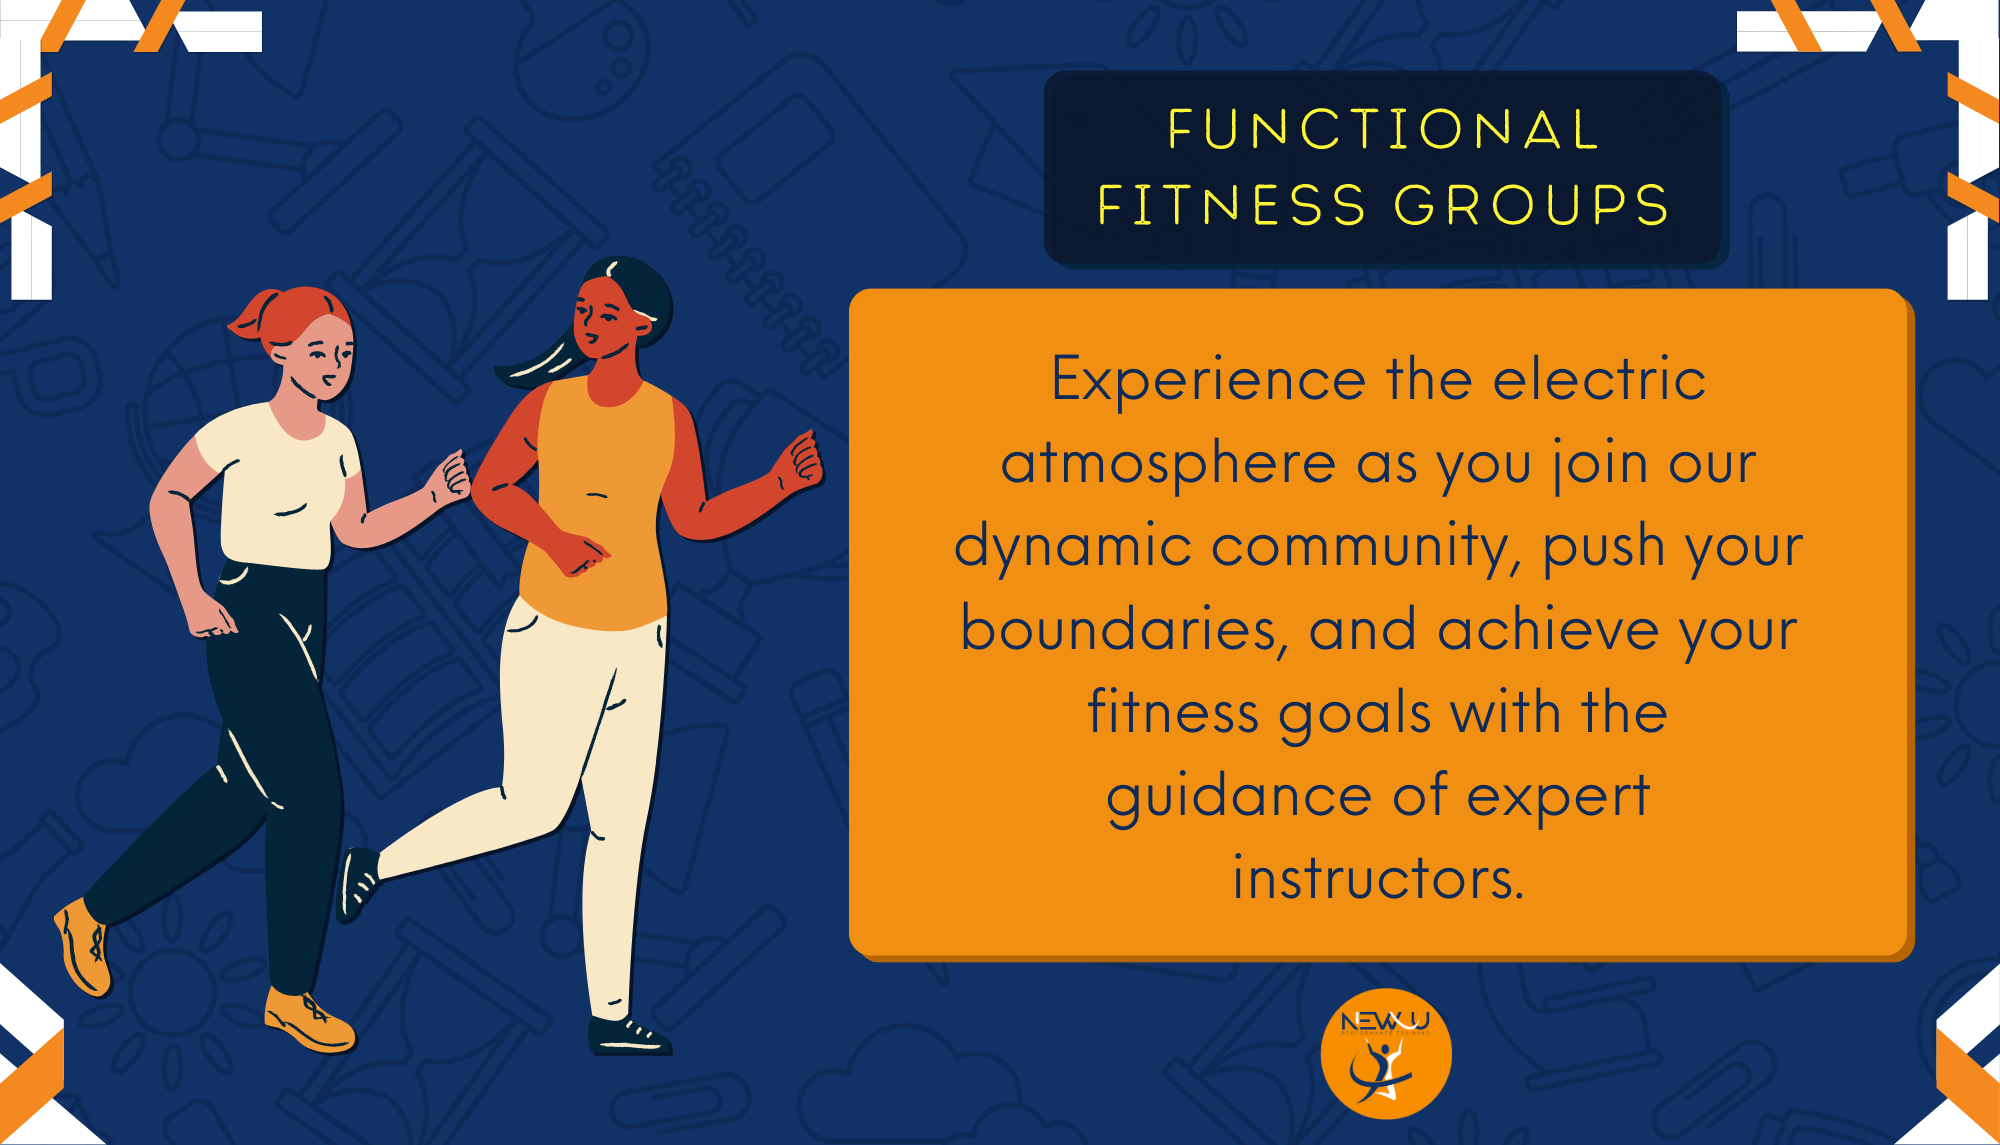 Are functional fitness group exercises good for you?